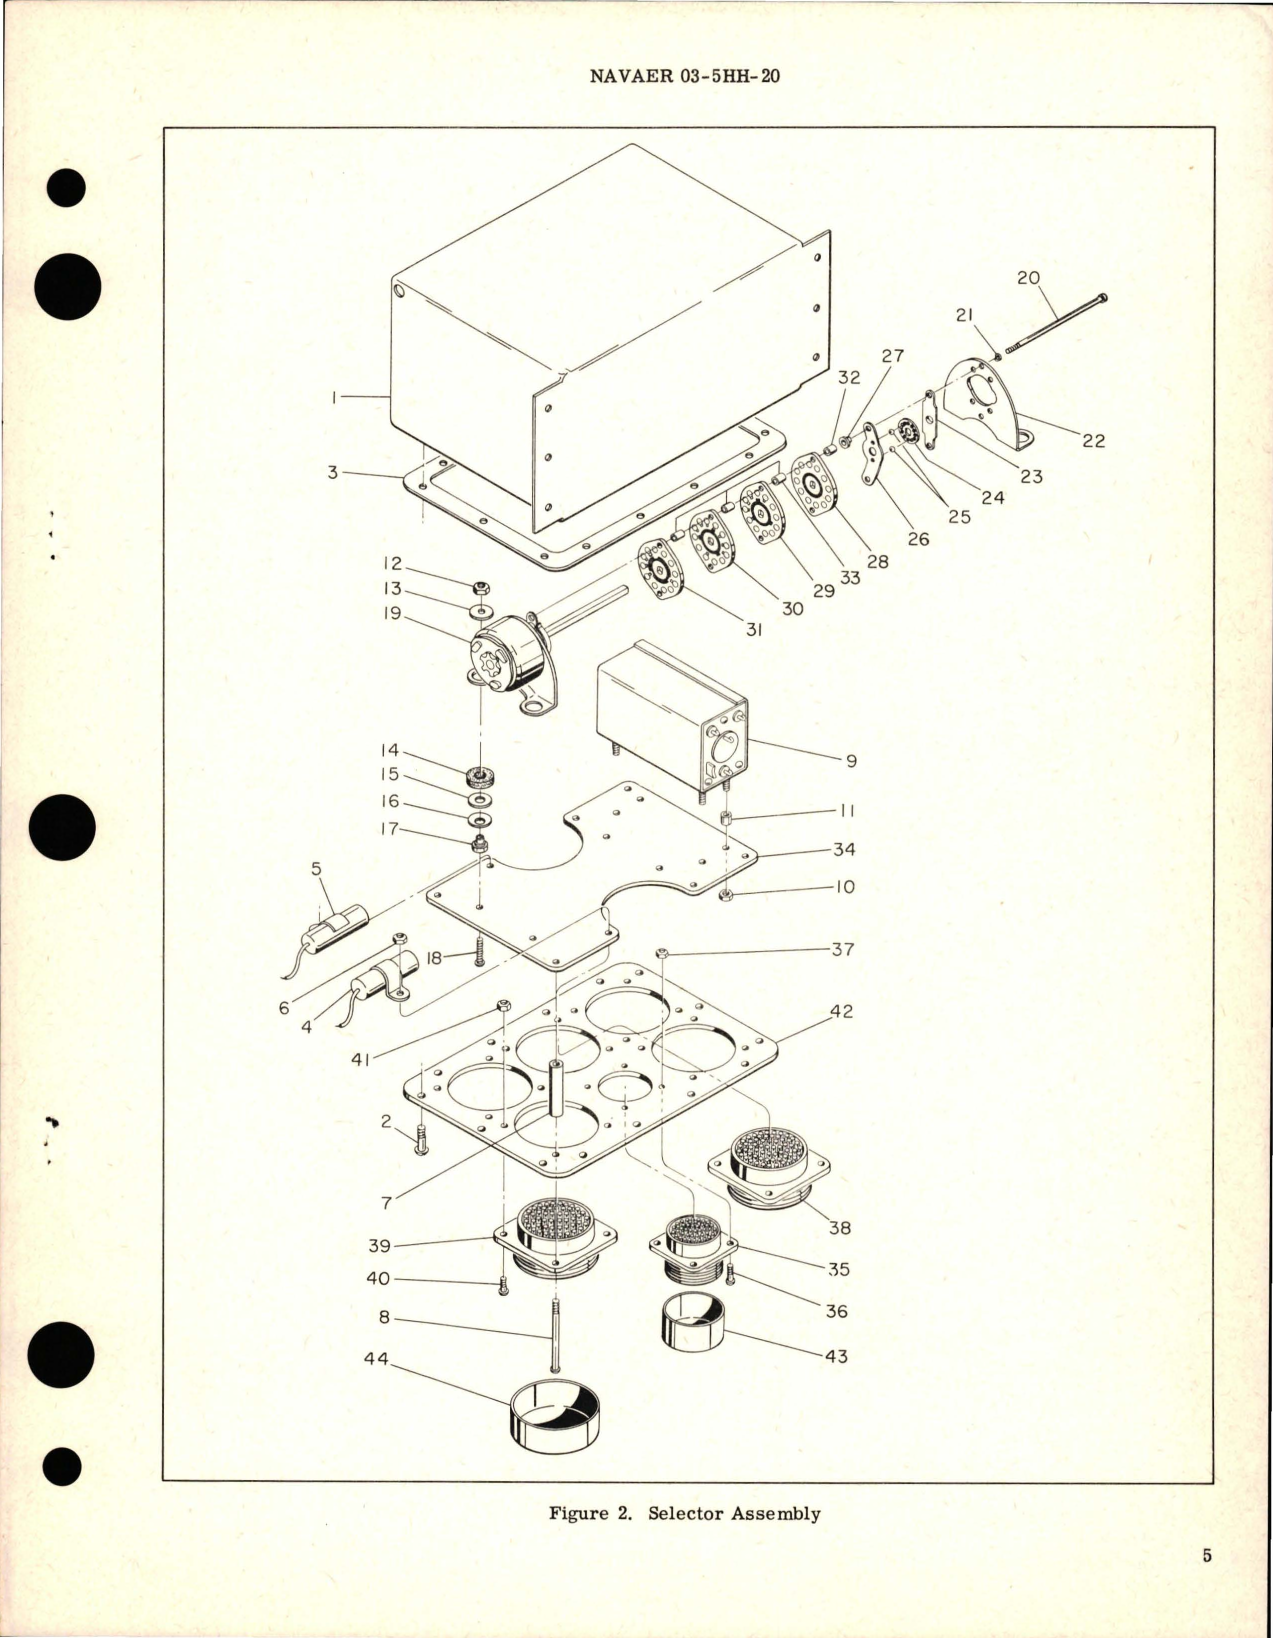 Sample page 5 from AirCorps Library document: Overhaul Instructions with Parts Breakdown for Selector Assembly Type II - Class B - Part D-9305-001